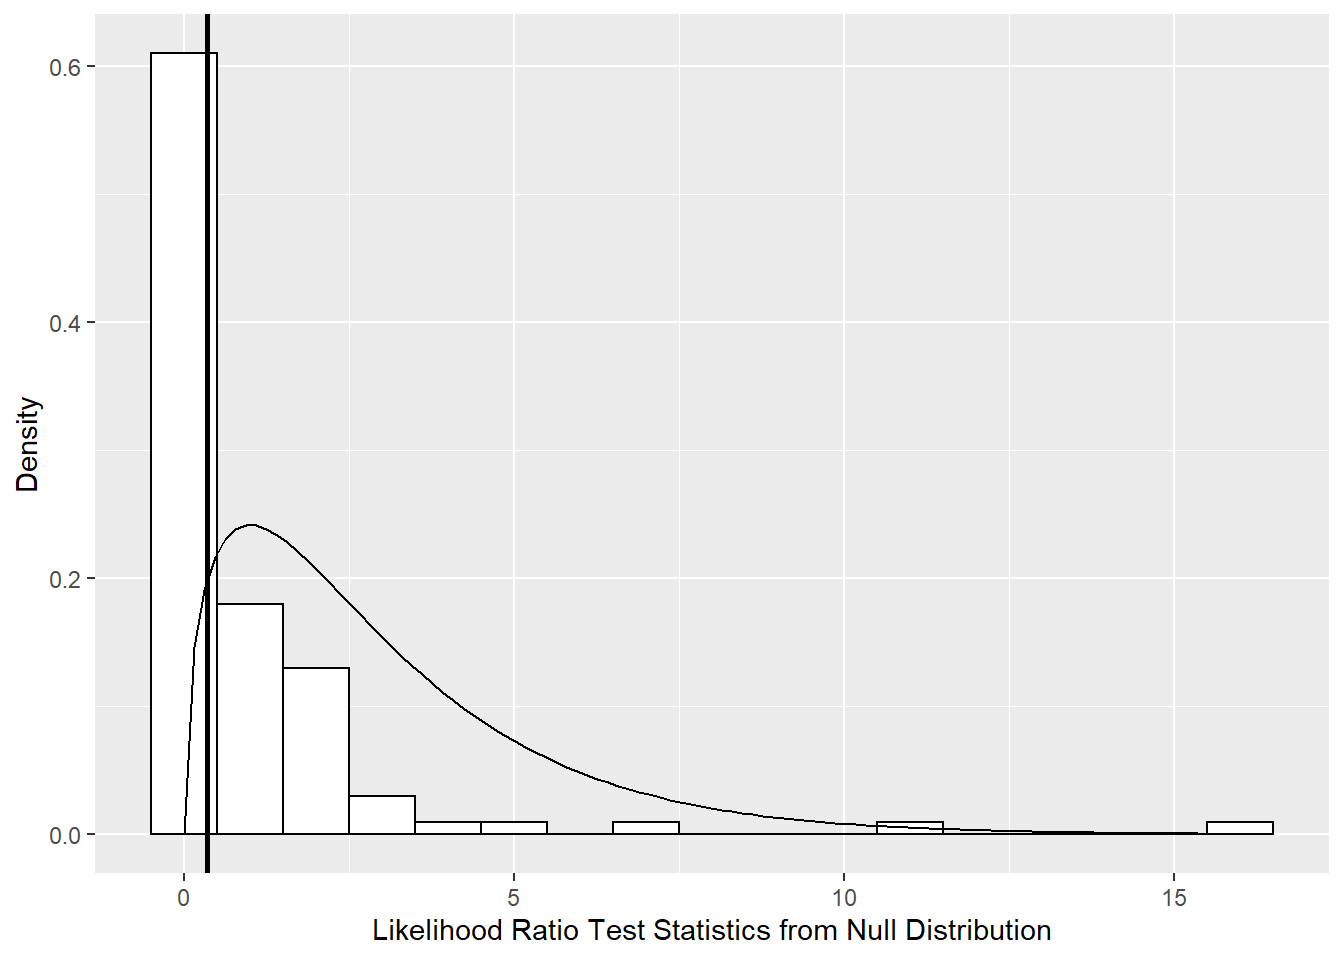 Null distribution of likelihood ratio test statistic comparing Models A3 and B3 derived using parametric bootstrap with 100 samples (histogram) compared to a chi-square distribution with 3 degrees of freedom (smooth curve).  The vertical line represents the observed likelihood ratio test statistic.